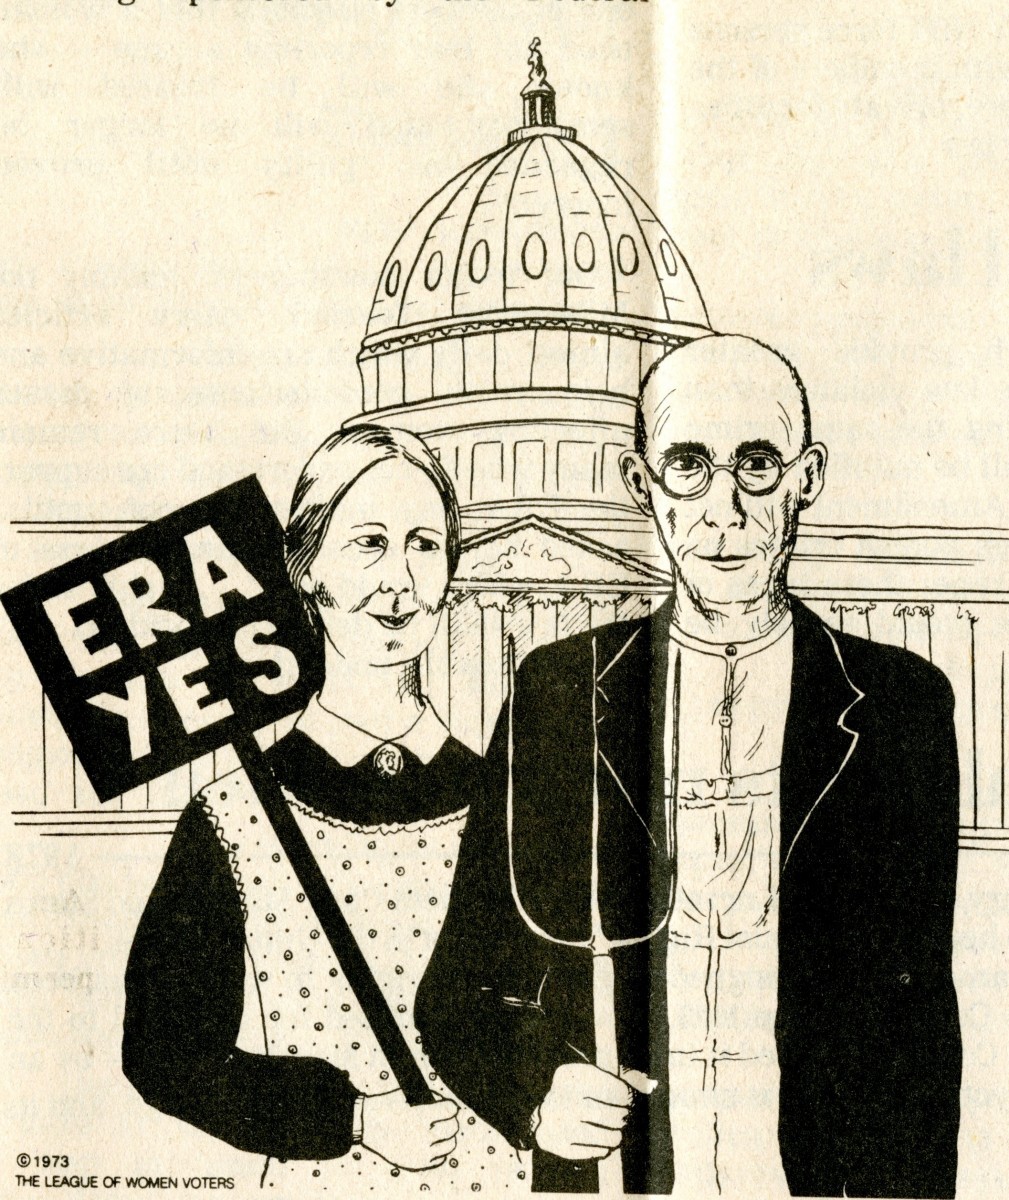 A cartoon of a farmer and his daughter, resembling the pair in the American Gothic painting, stand smiling in front of the White House. The farmer holds a pitchfork, and the woman hold a "ERA YES" sign.